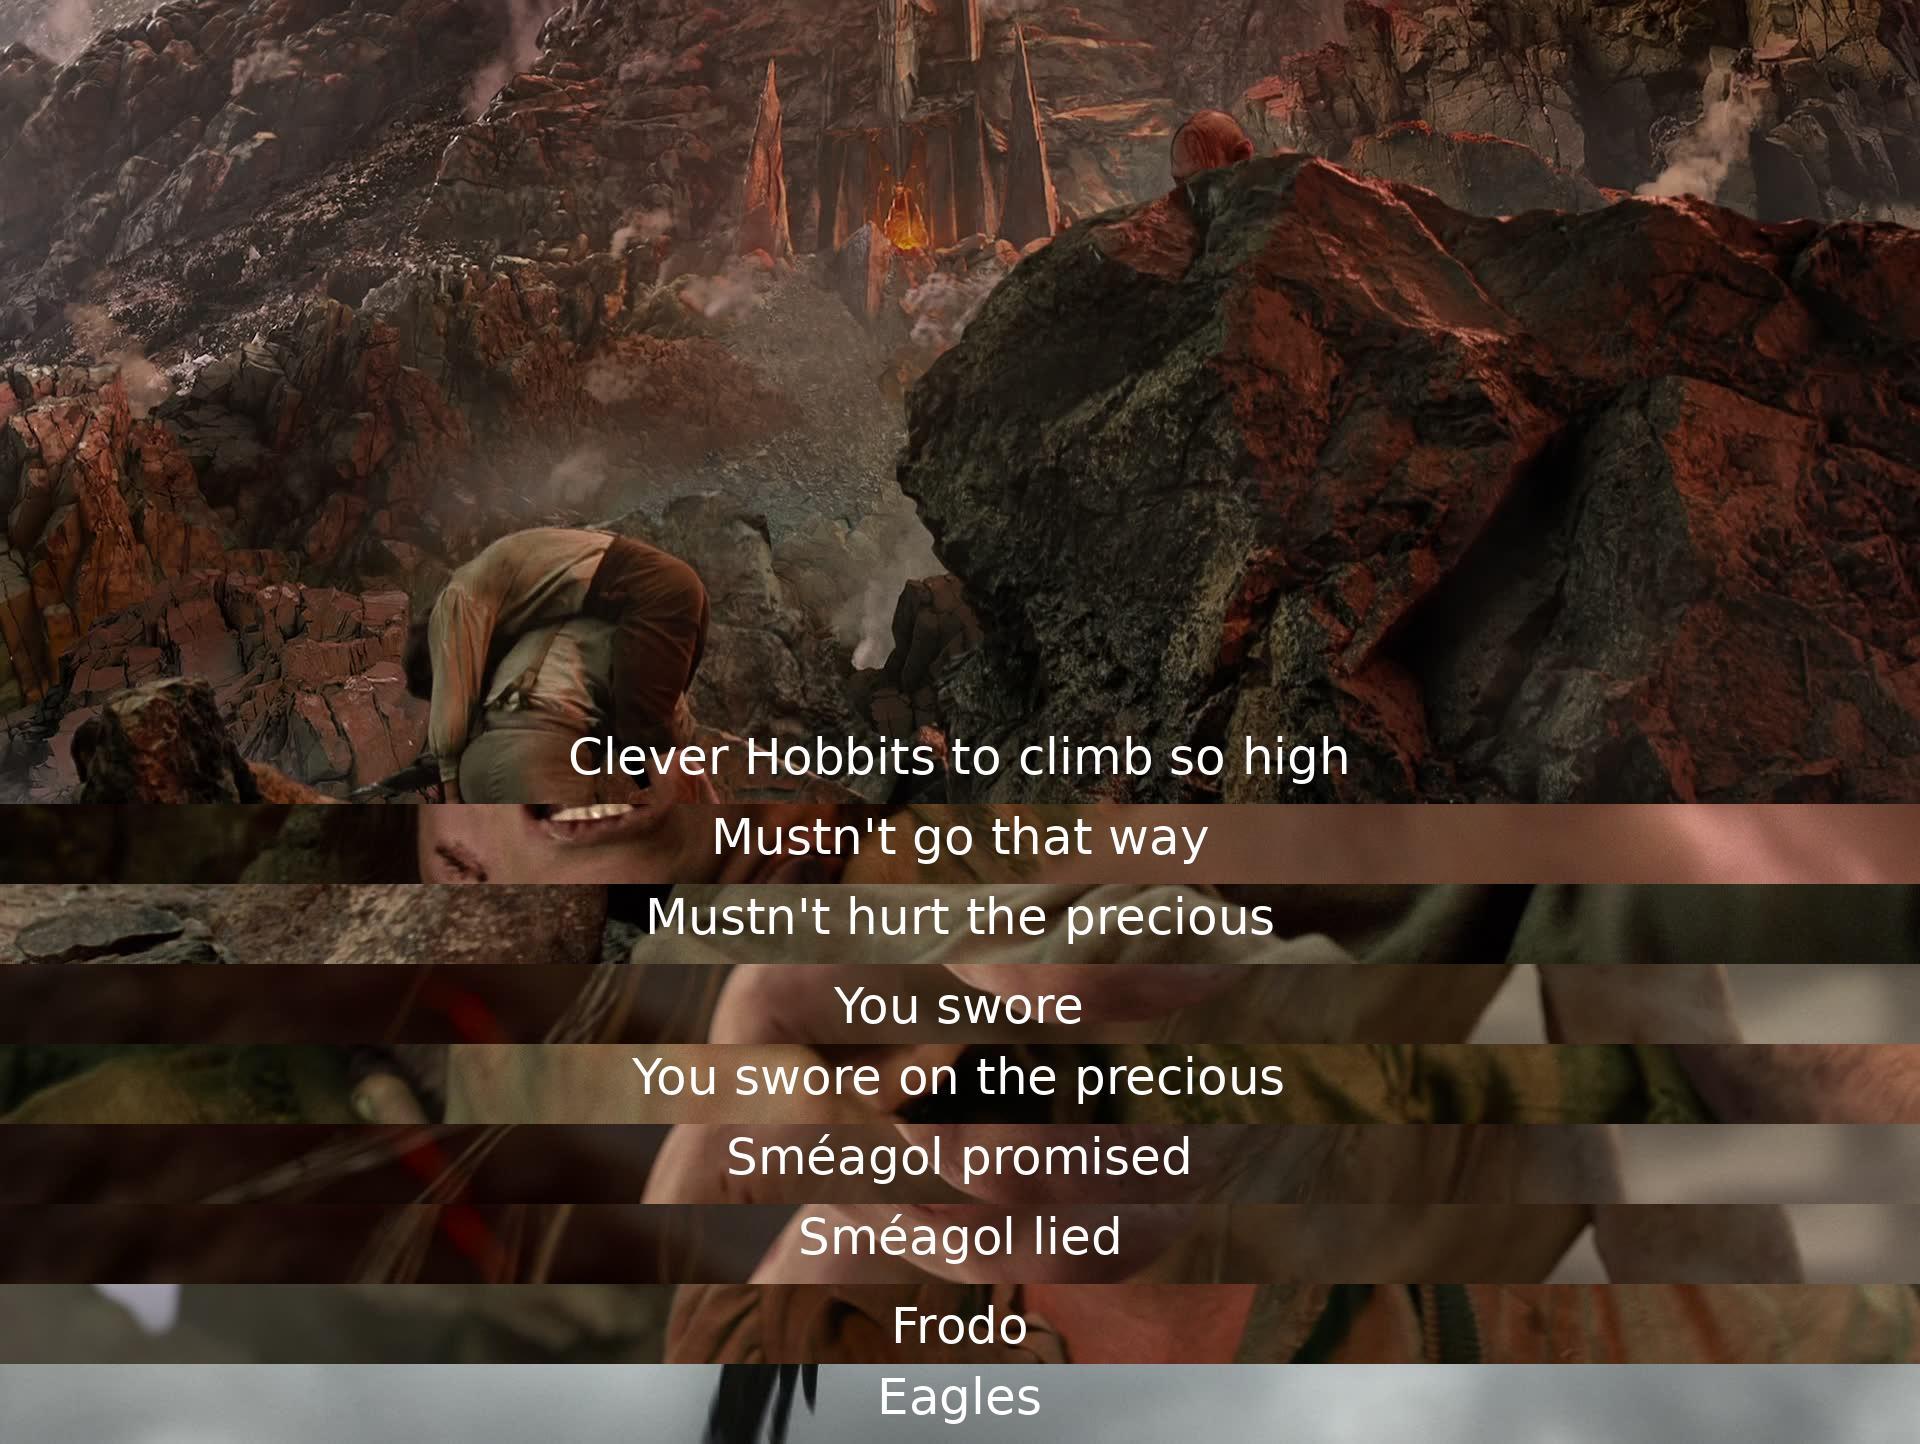 The dialogue involves a character warning against harming a precious object and confronting another for breaking a promise. The mention of climbing heights, betrayal, and the importance of a character named Frodo are key elements in the exchange.